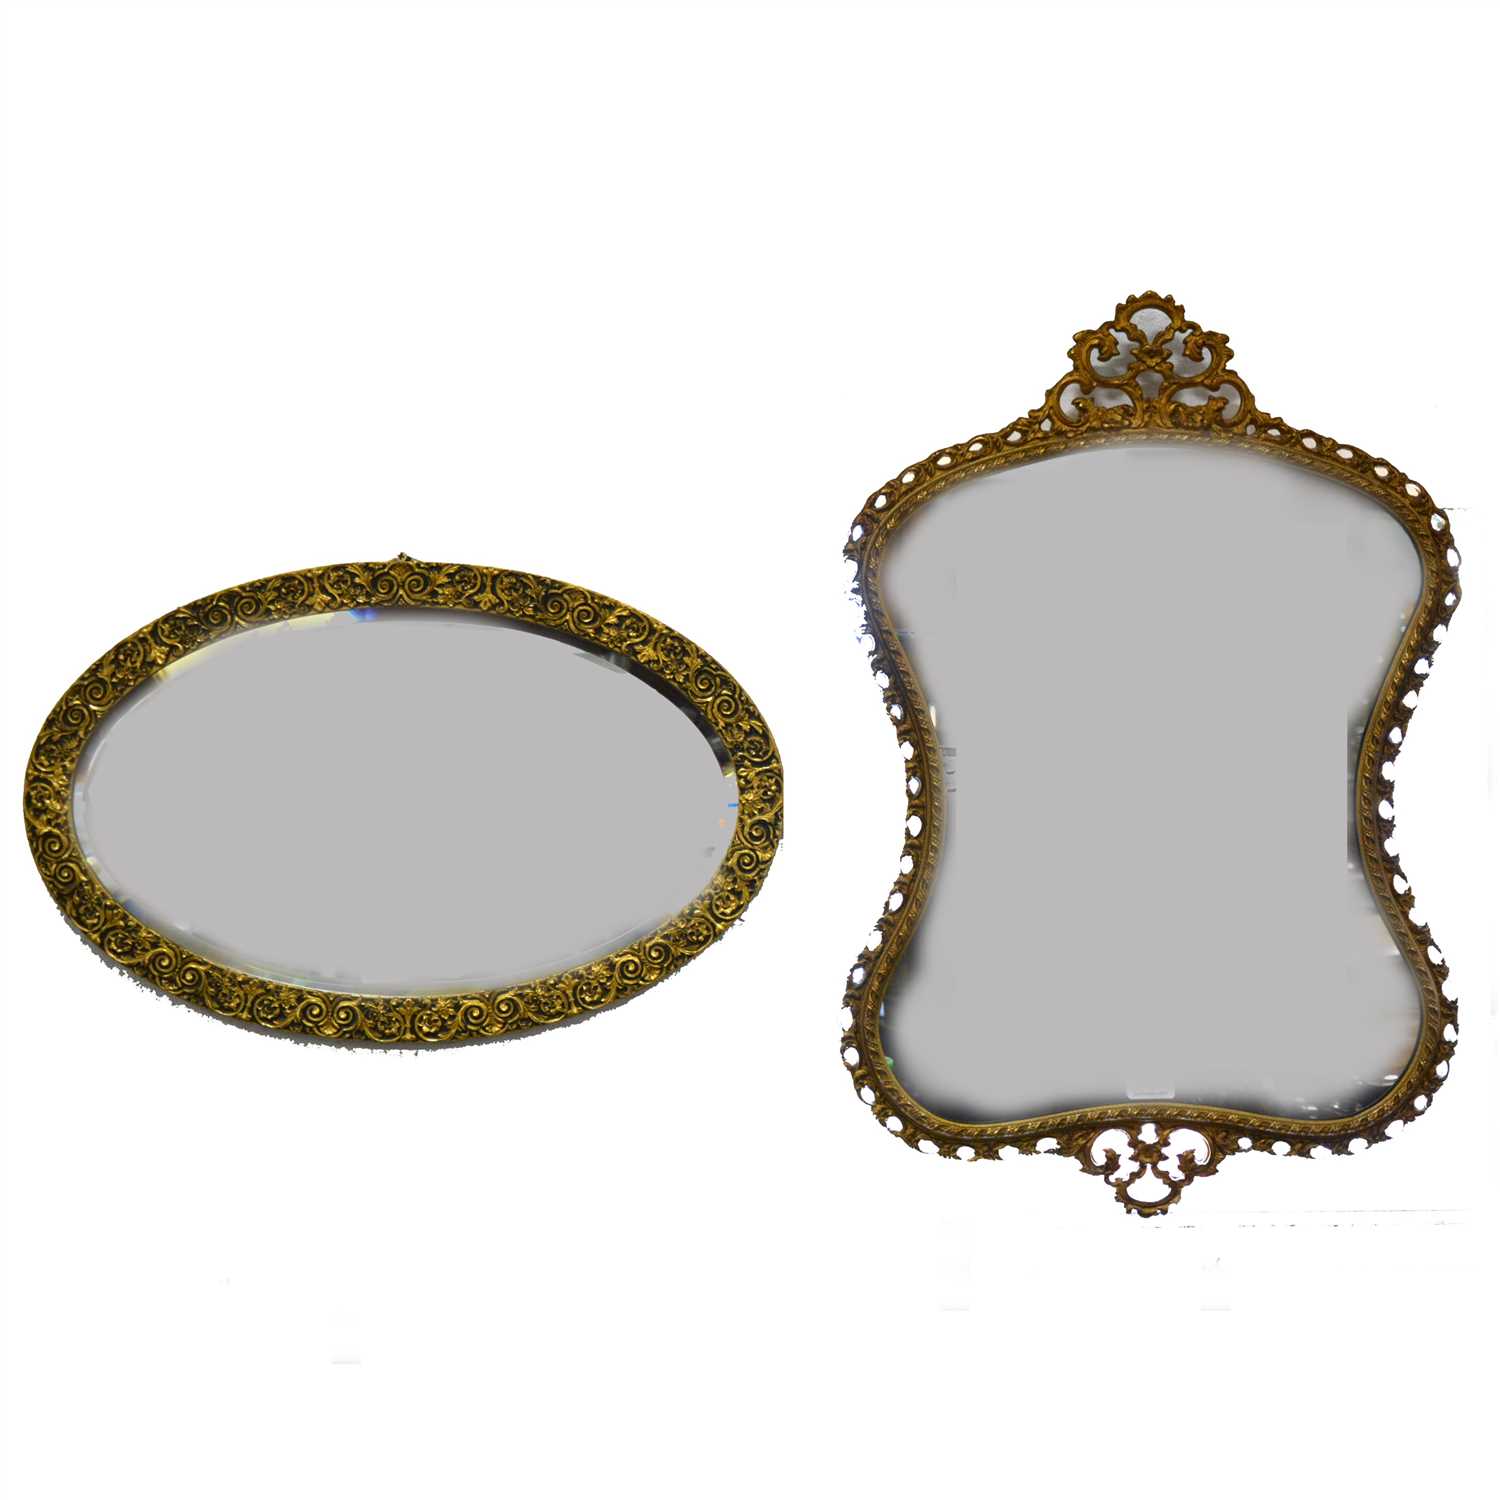 Lot 527 - A gilt composition cartouche-shape wall mirror, and an oval wall mirror.